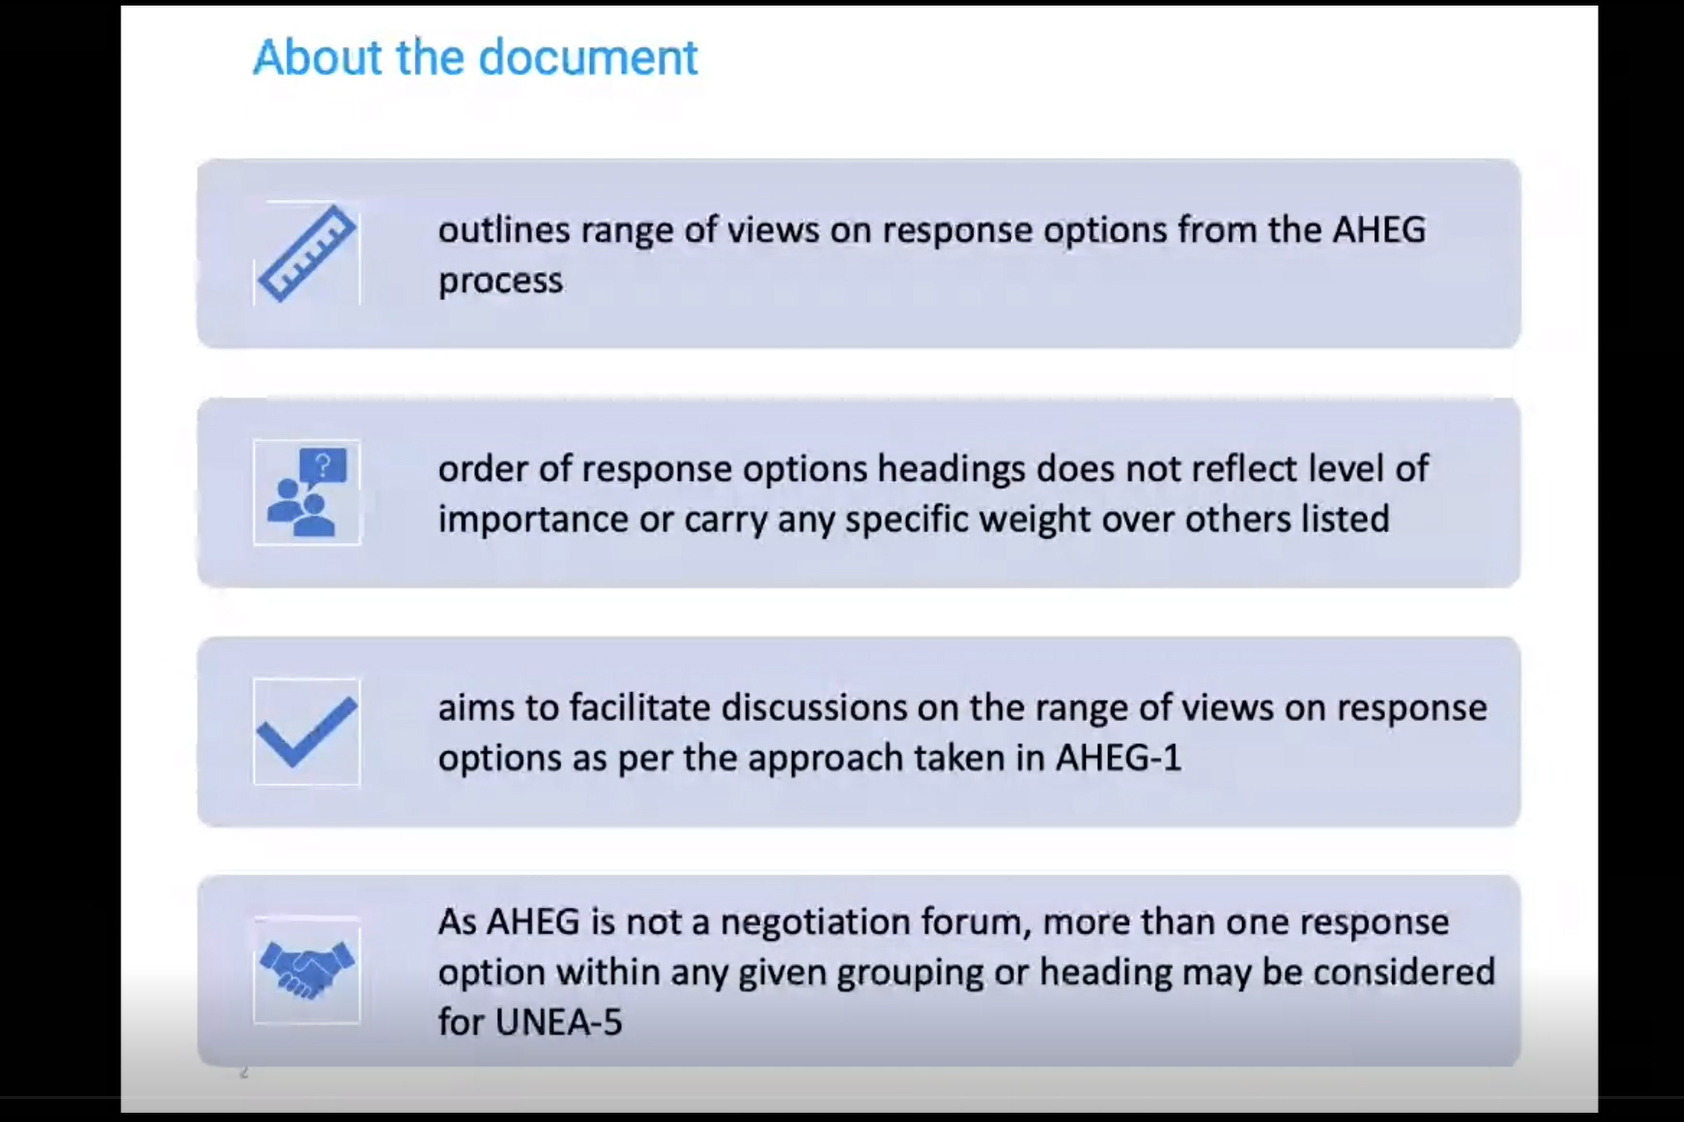 Presentation: Identification of potential options for continued work for consideration by UNEA